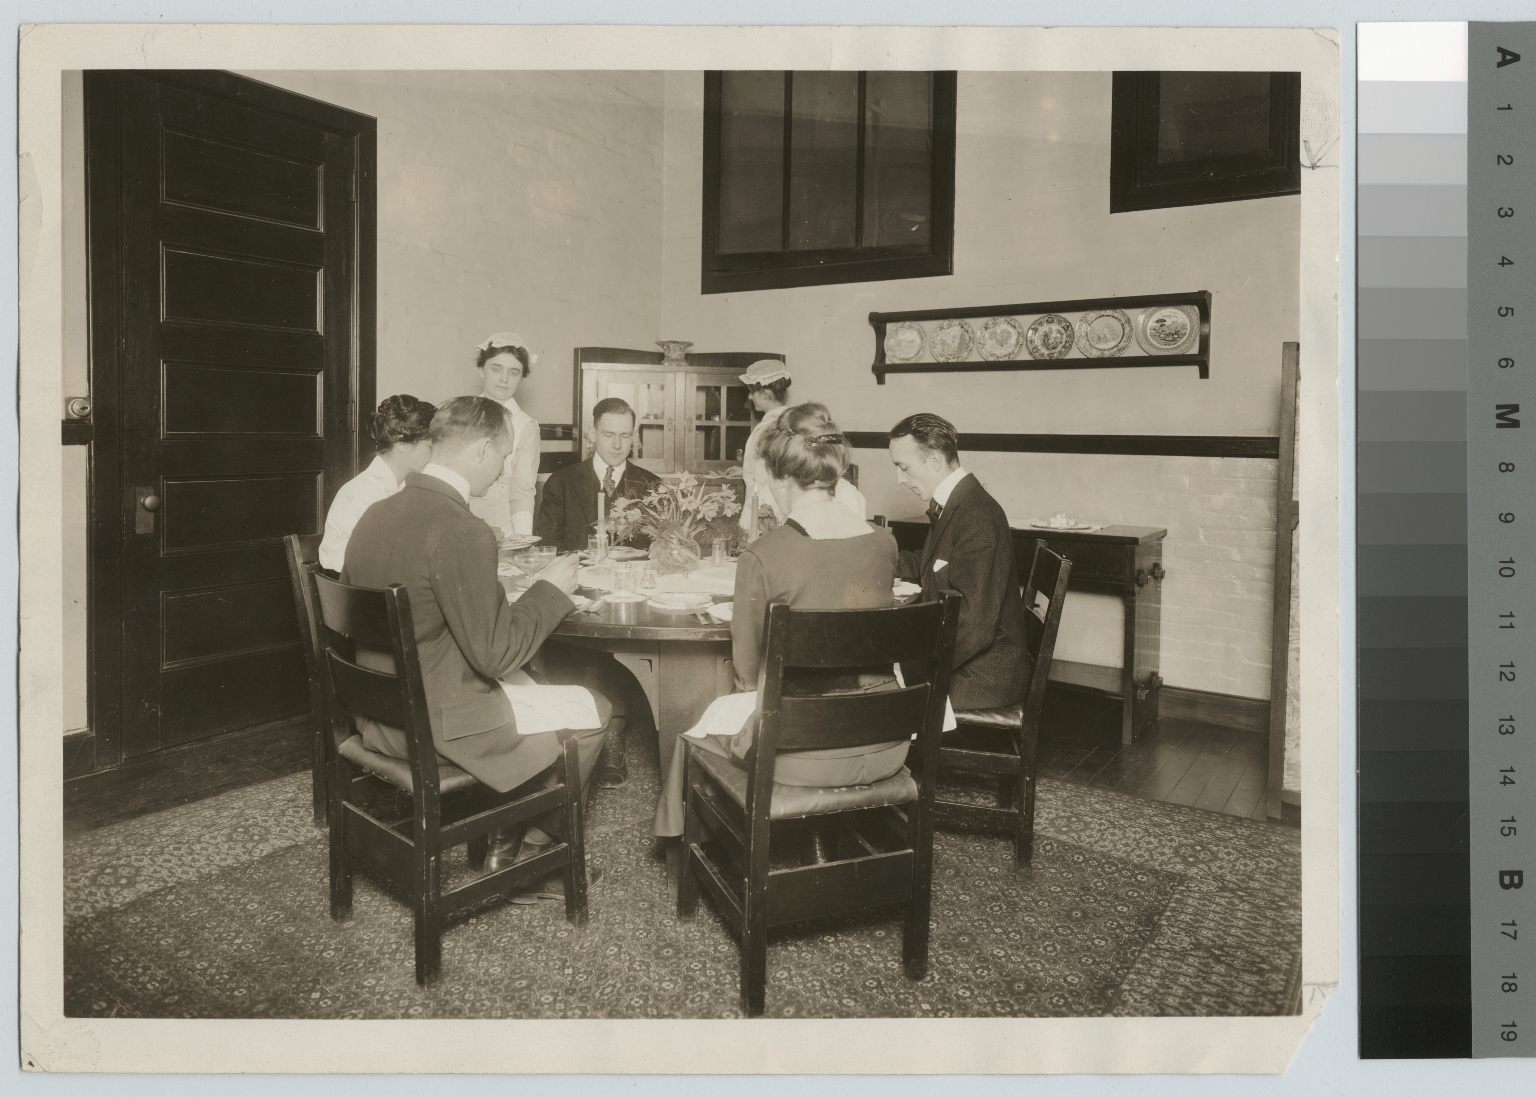 Students serving food, Practice House, Rochester Athenaeum and Mechanics Institute